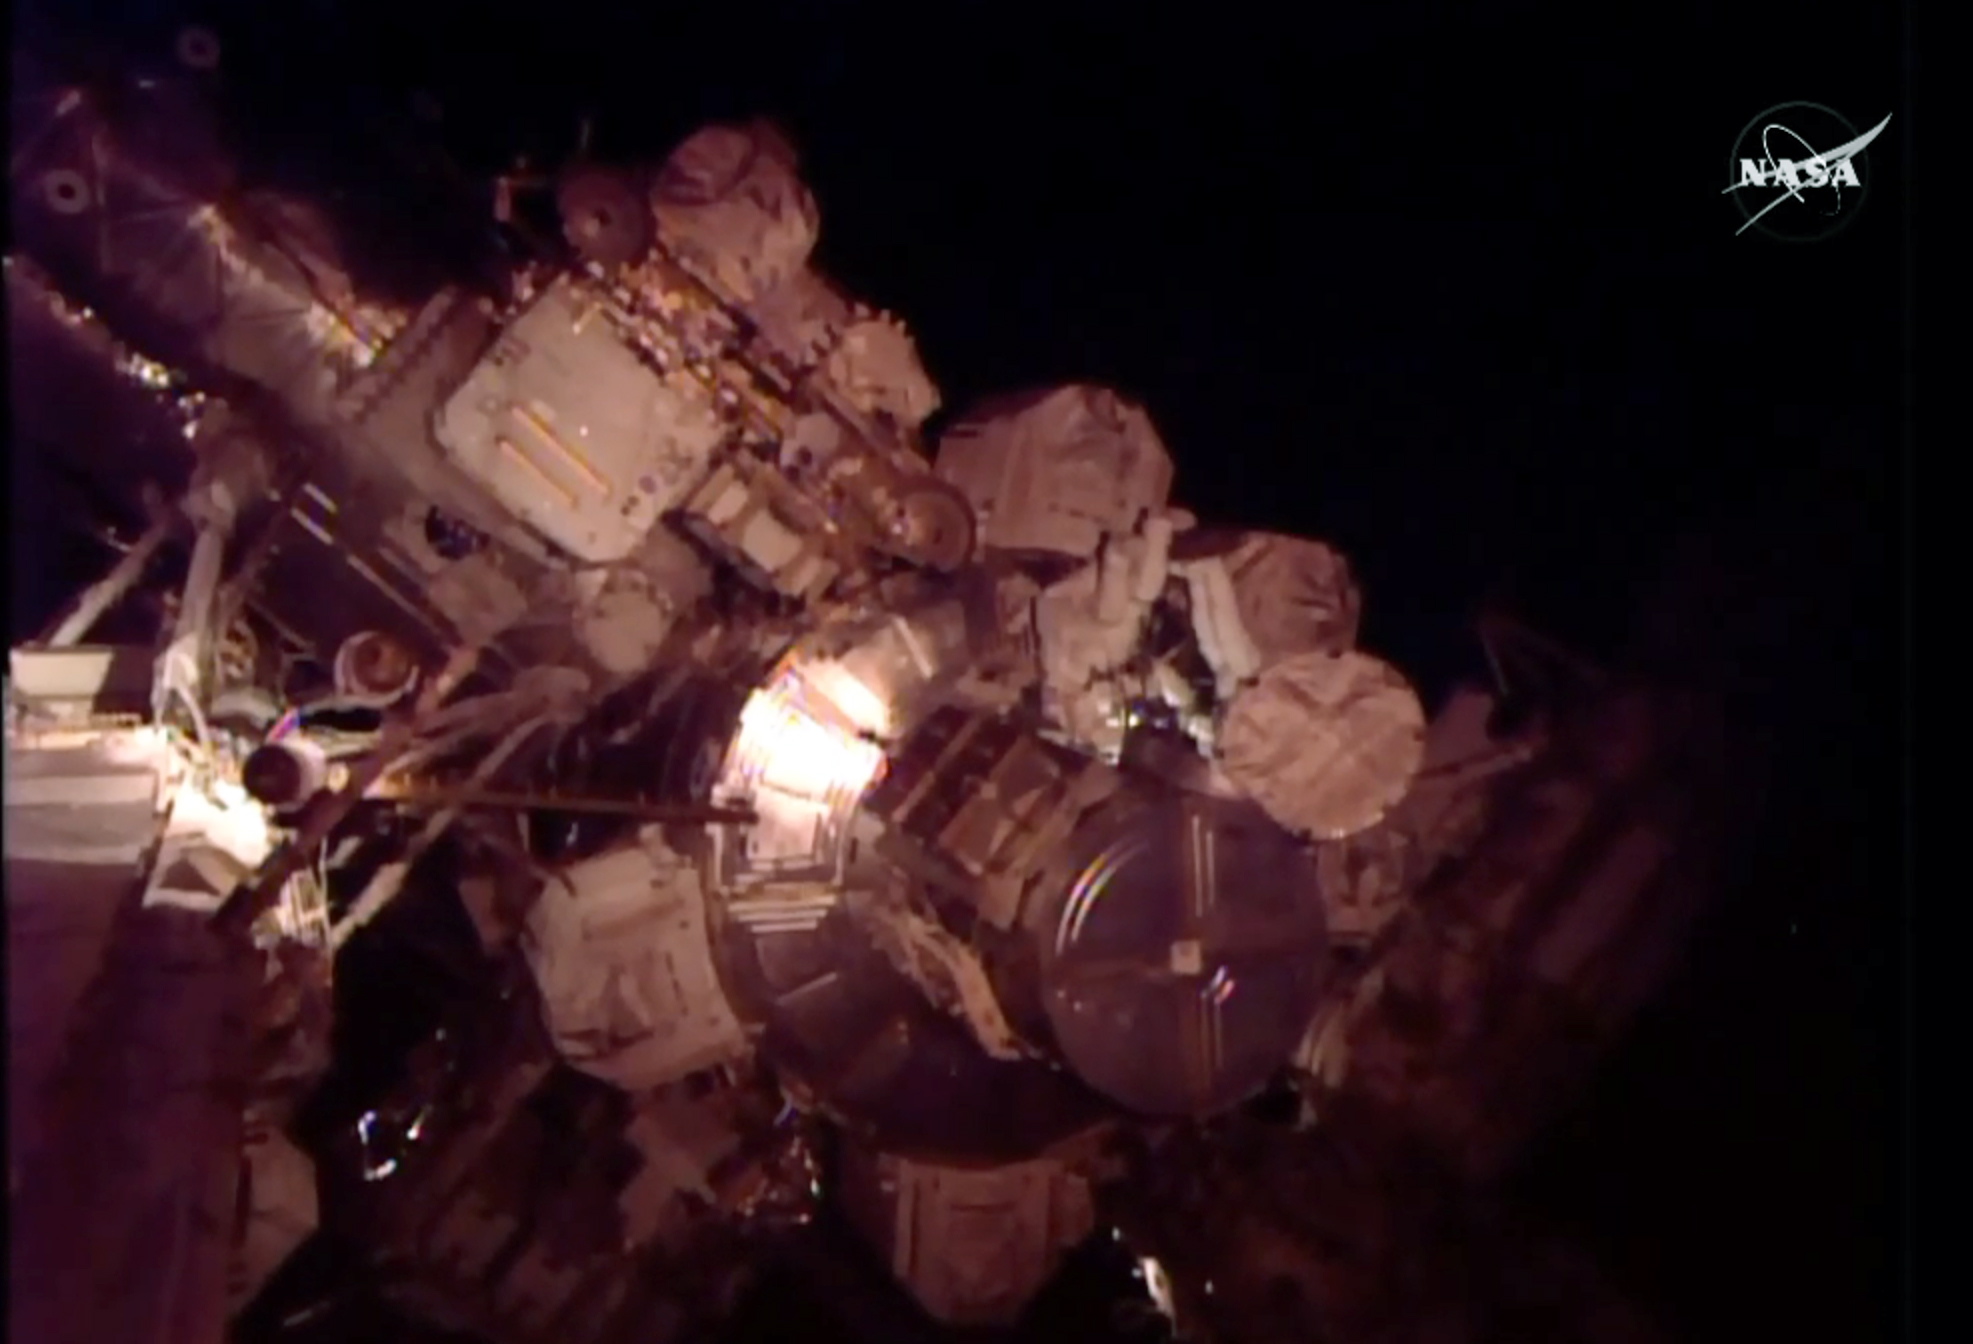 In this frame grab from NASA Television, astronauts Scott Kelly and Kjell Lindgren perform maintenance outside the International Space Station on Friday. Friday&#039;s excursion involves work on the space station&#039;s cooling system. Kelly has been at the 250-mile-high outpost since March, and isn&#039;t due back until next March. Friday marks his 224th day in orbit, a U.S. record.